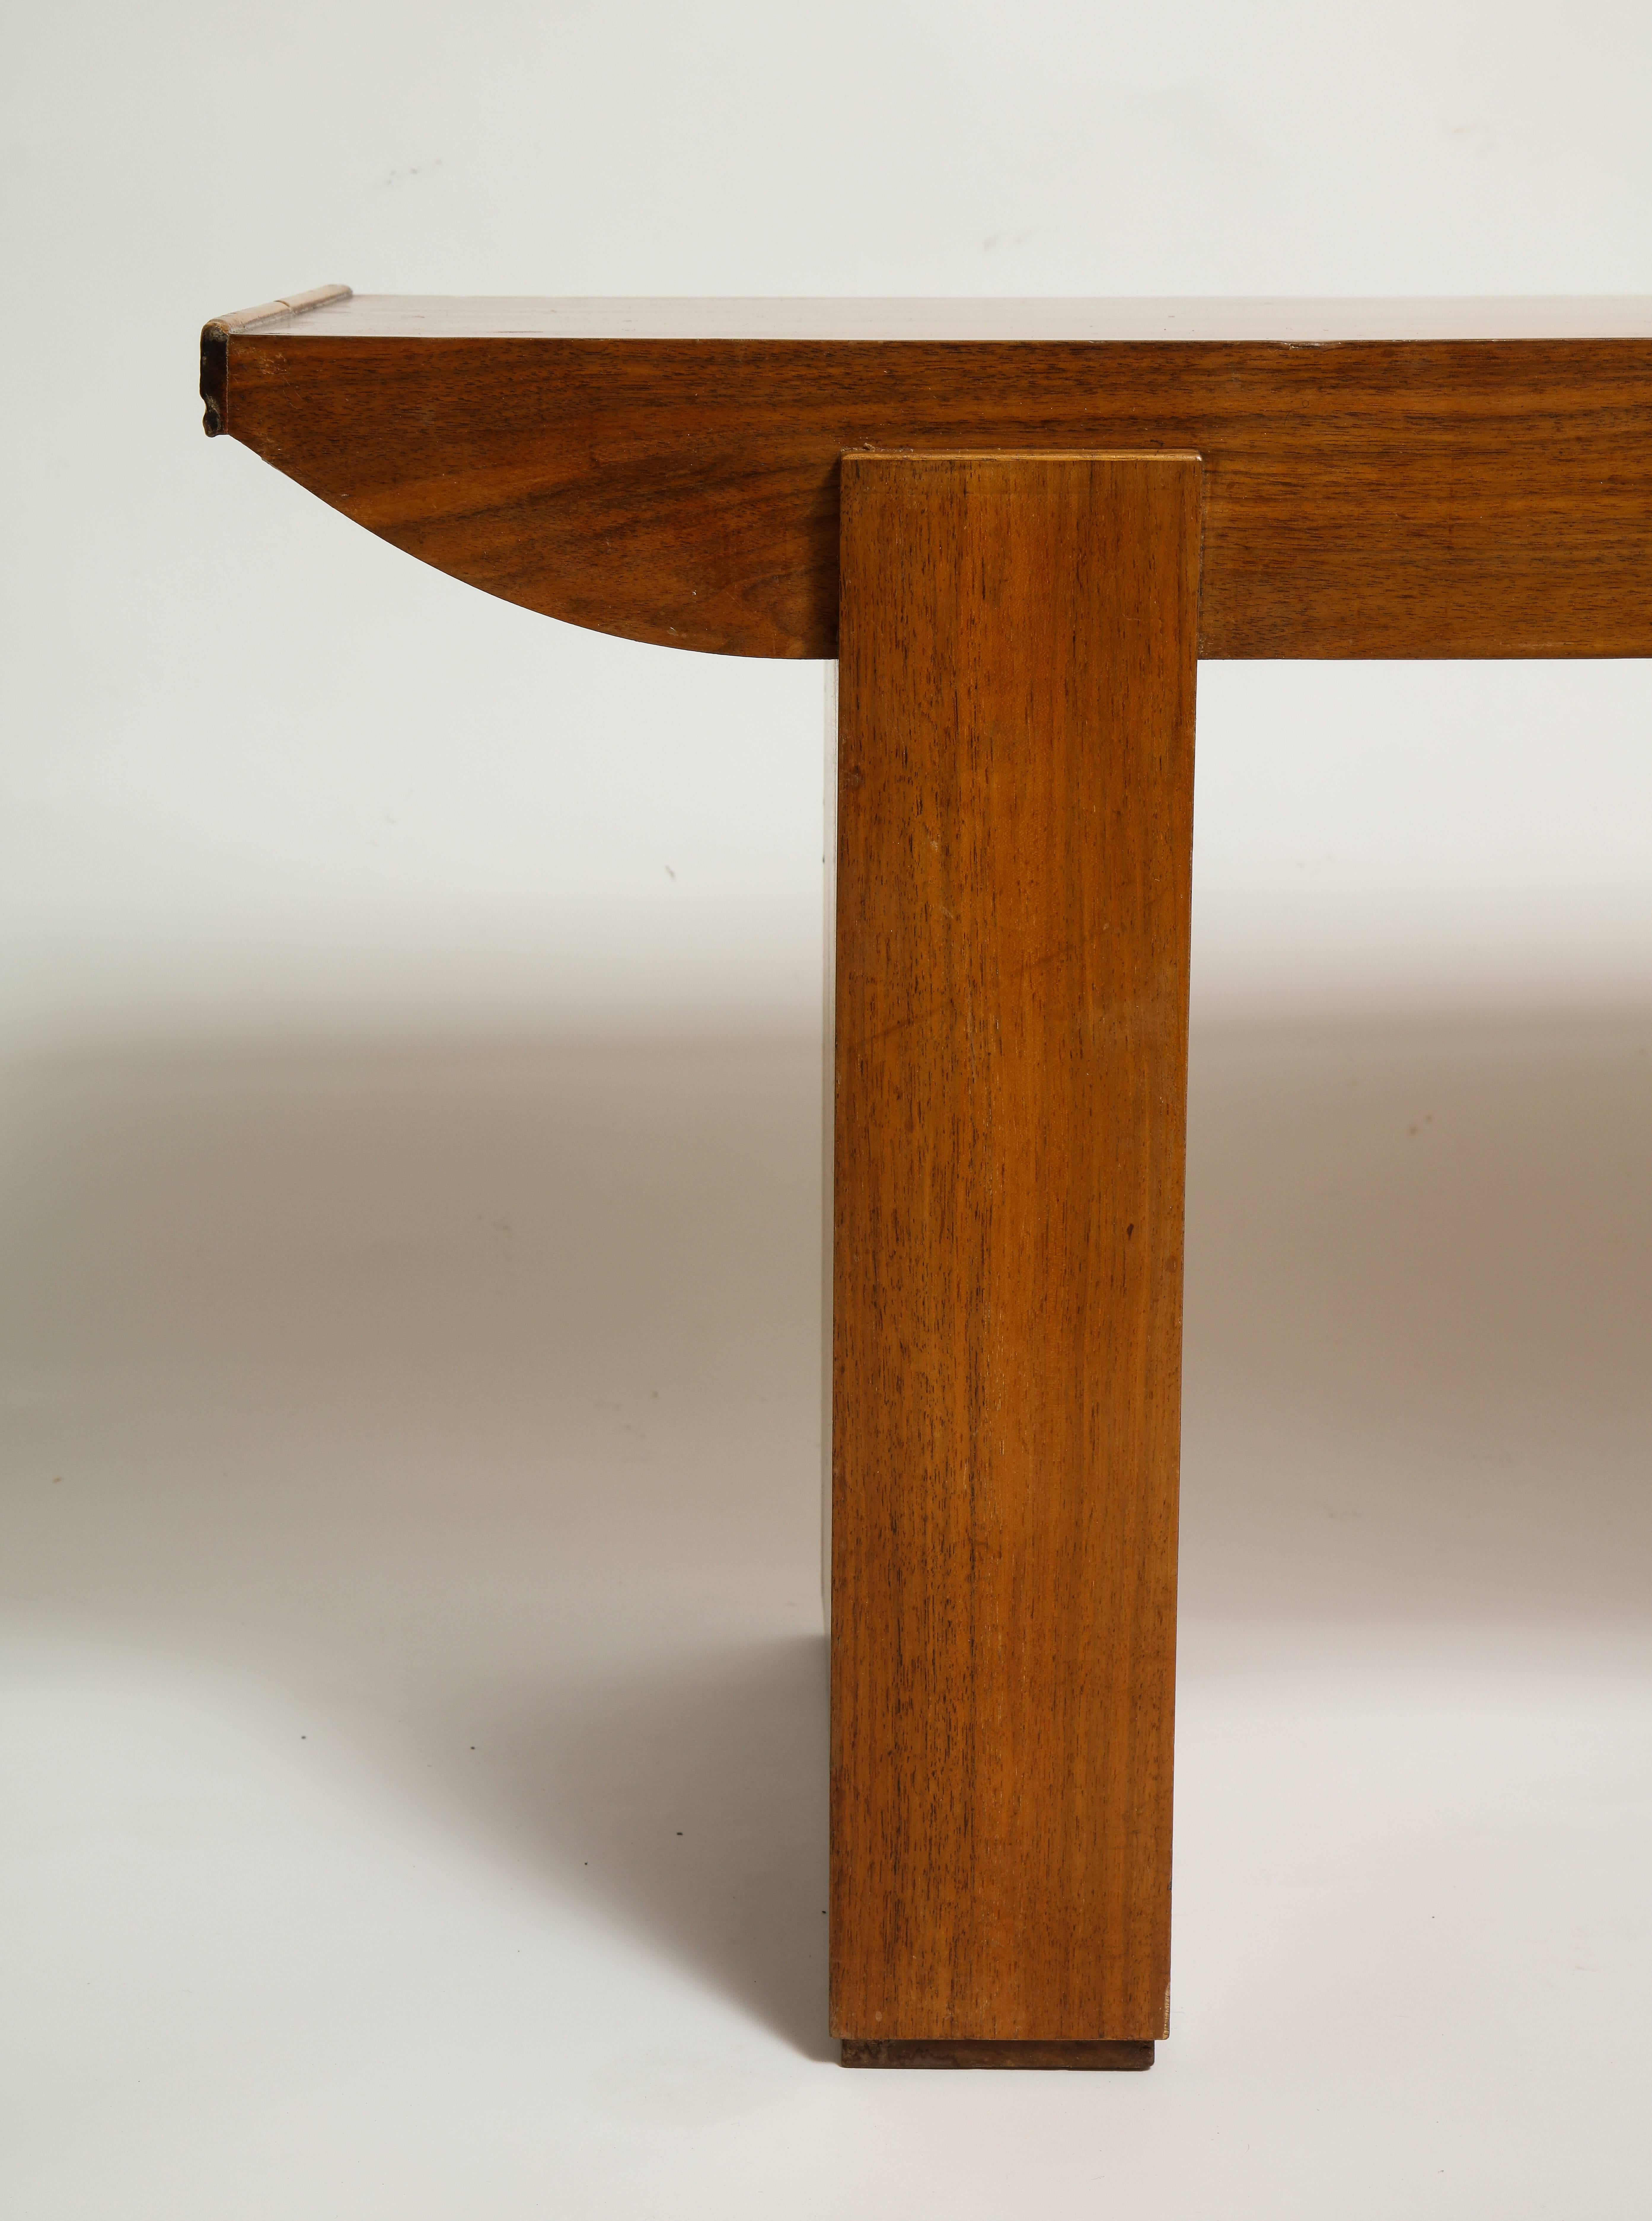 Mid-20th Century Dominique Attr. Deco Walnut Table Bench Modernist 1930 Mid Century France